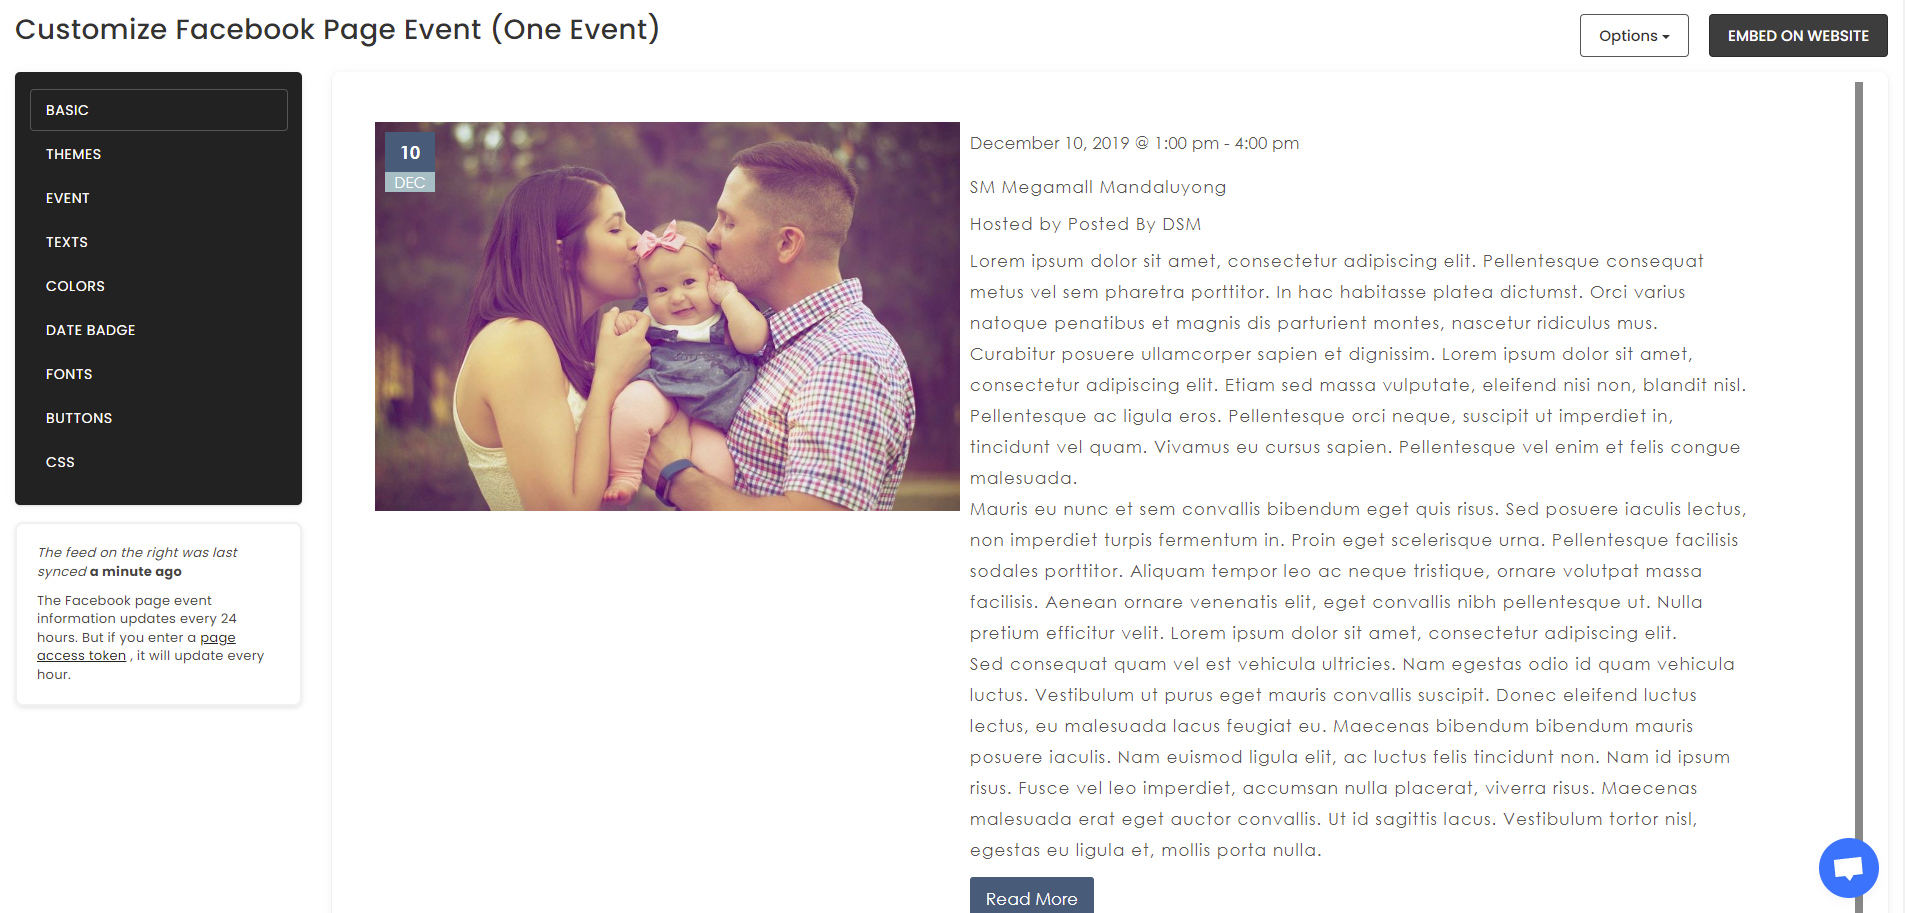 Customize your feed - How To Embed Facebook Page Event (One Event) On Squarespace Website For Free?